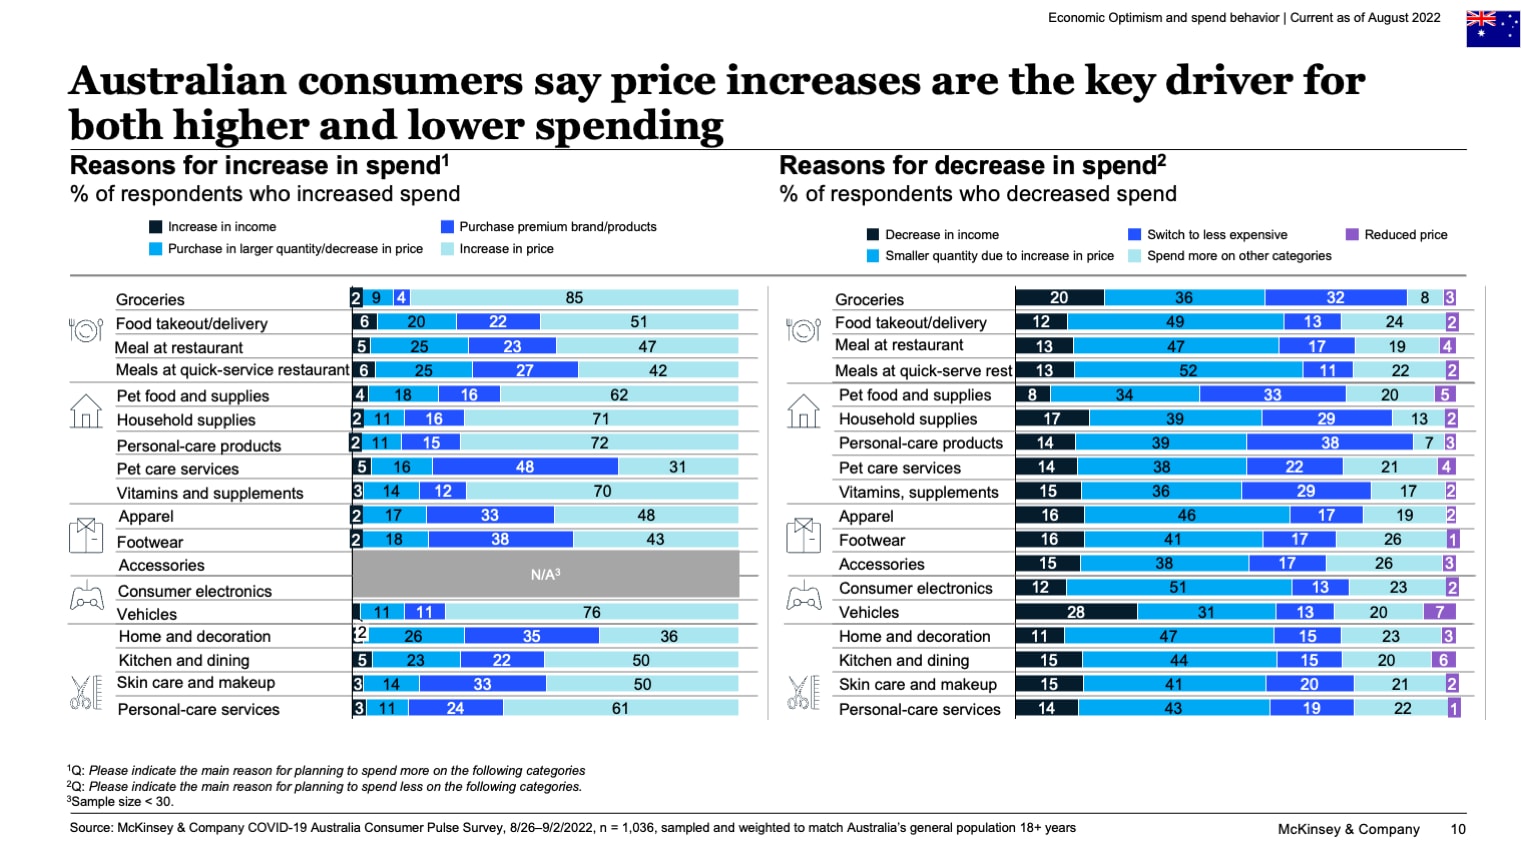 Australian consumers say price increases are the key driver for both higher and lower spending